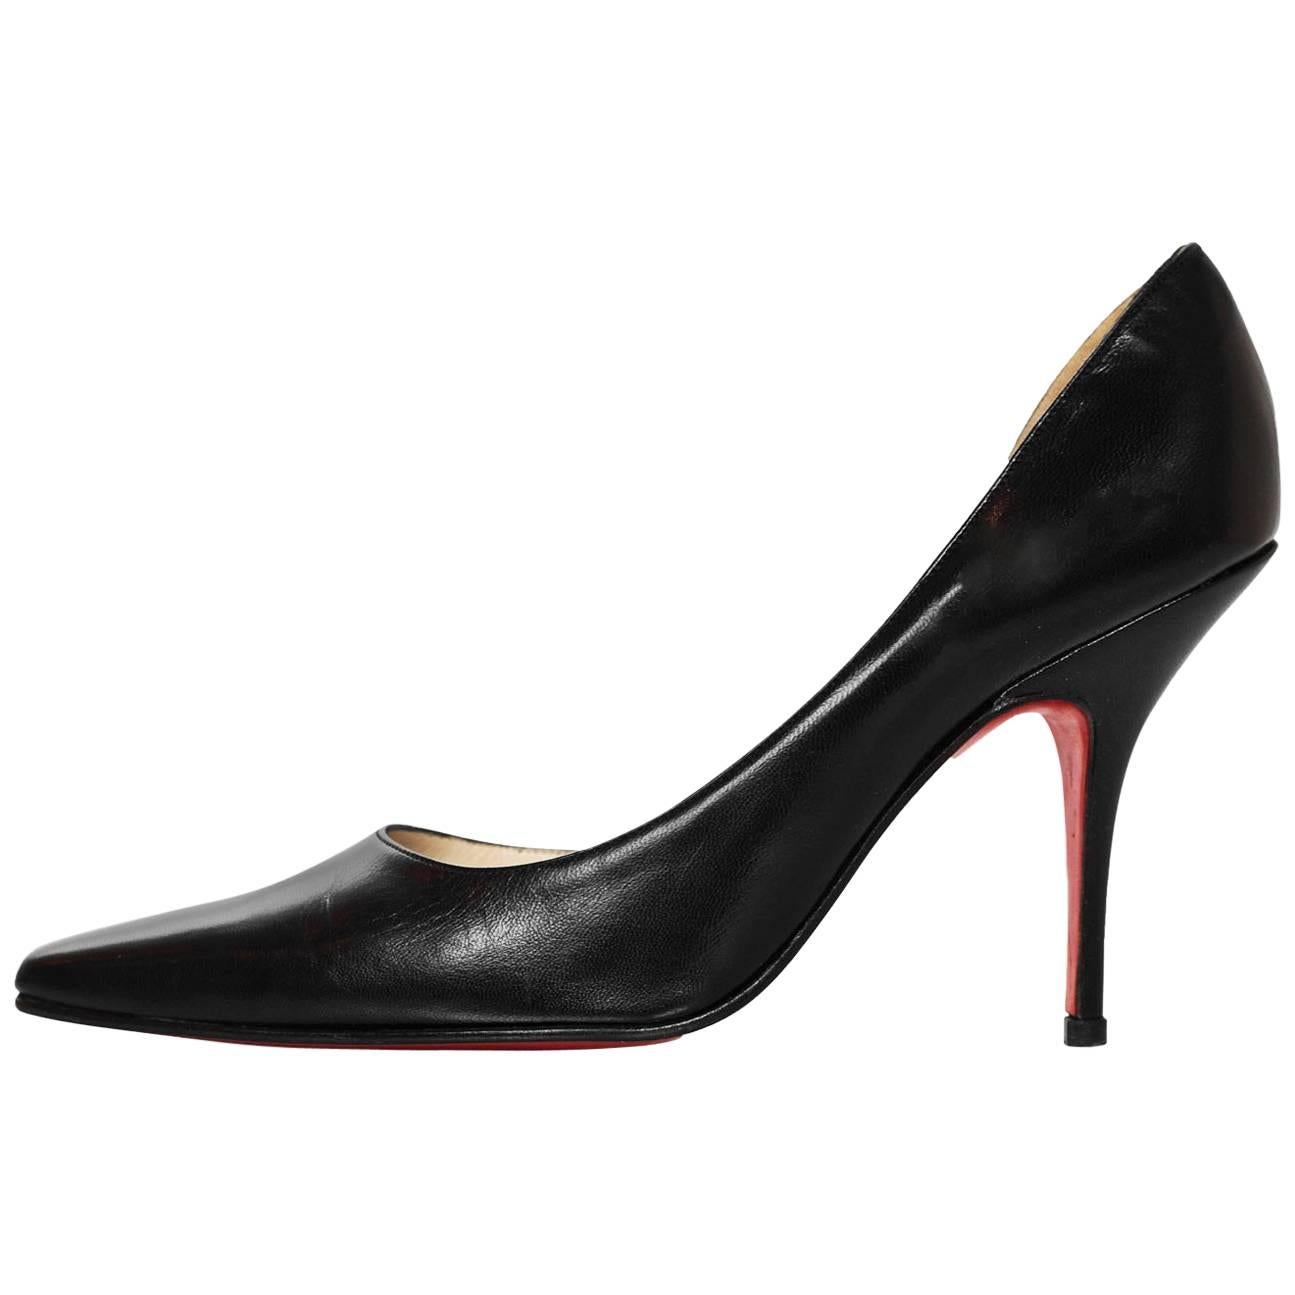 Christian Louboutin Black Leather d'Orsay Pumps Sz 37.5 with Box